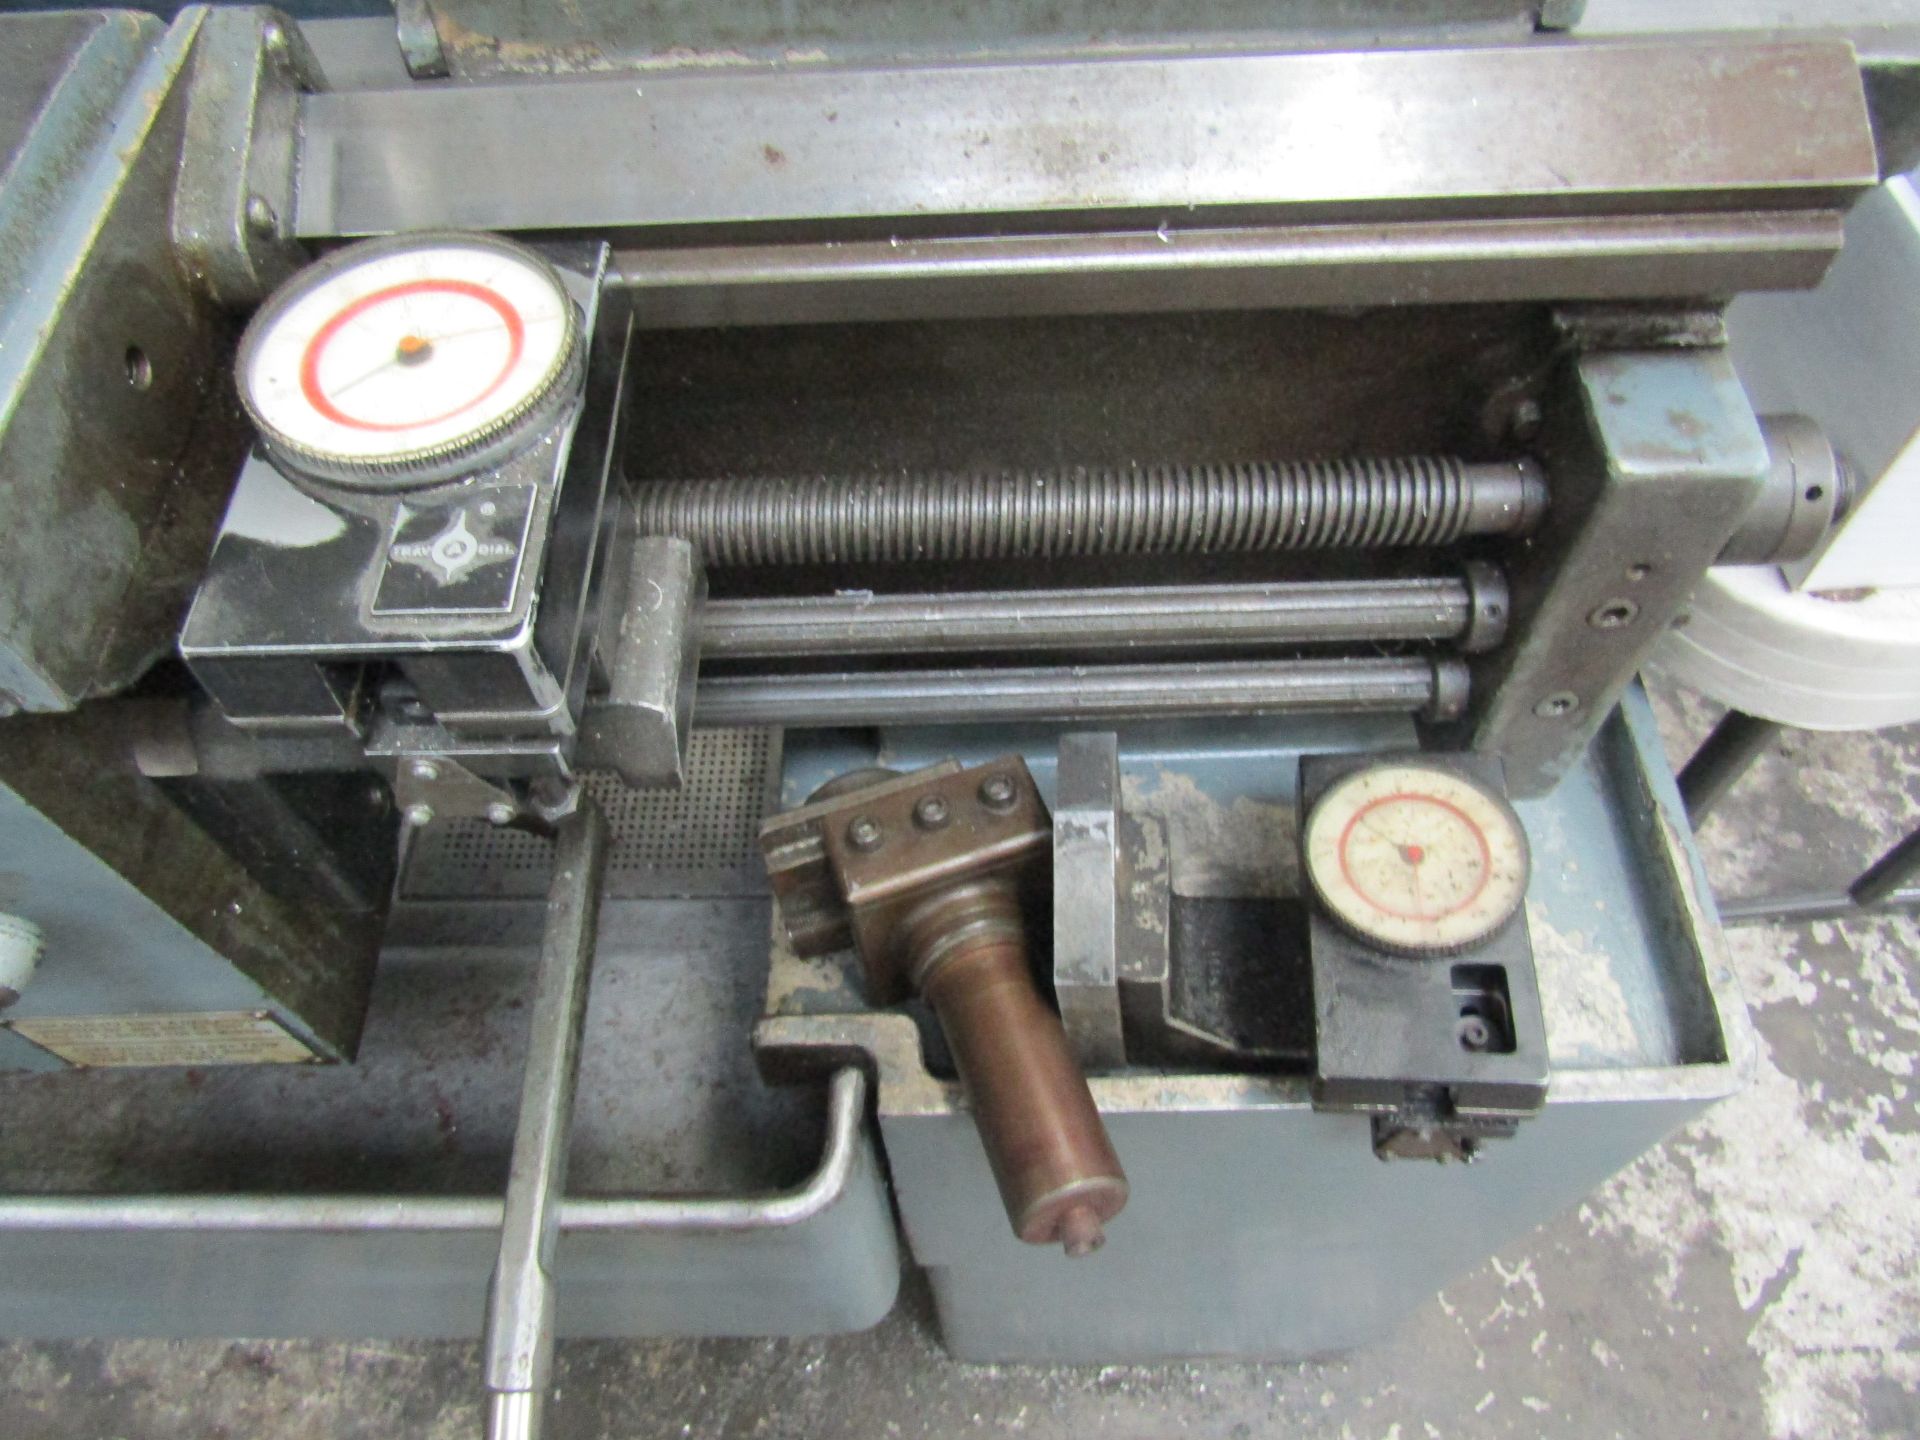 1971 LEBLOND REGAL ENGINE LATHE, 15" SWING, SERIAL 8C-3566. WITH ASSORTED TOOL HOLDERS AND - Image 8 of 11